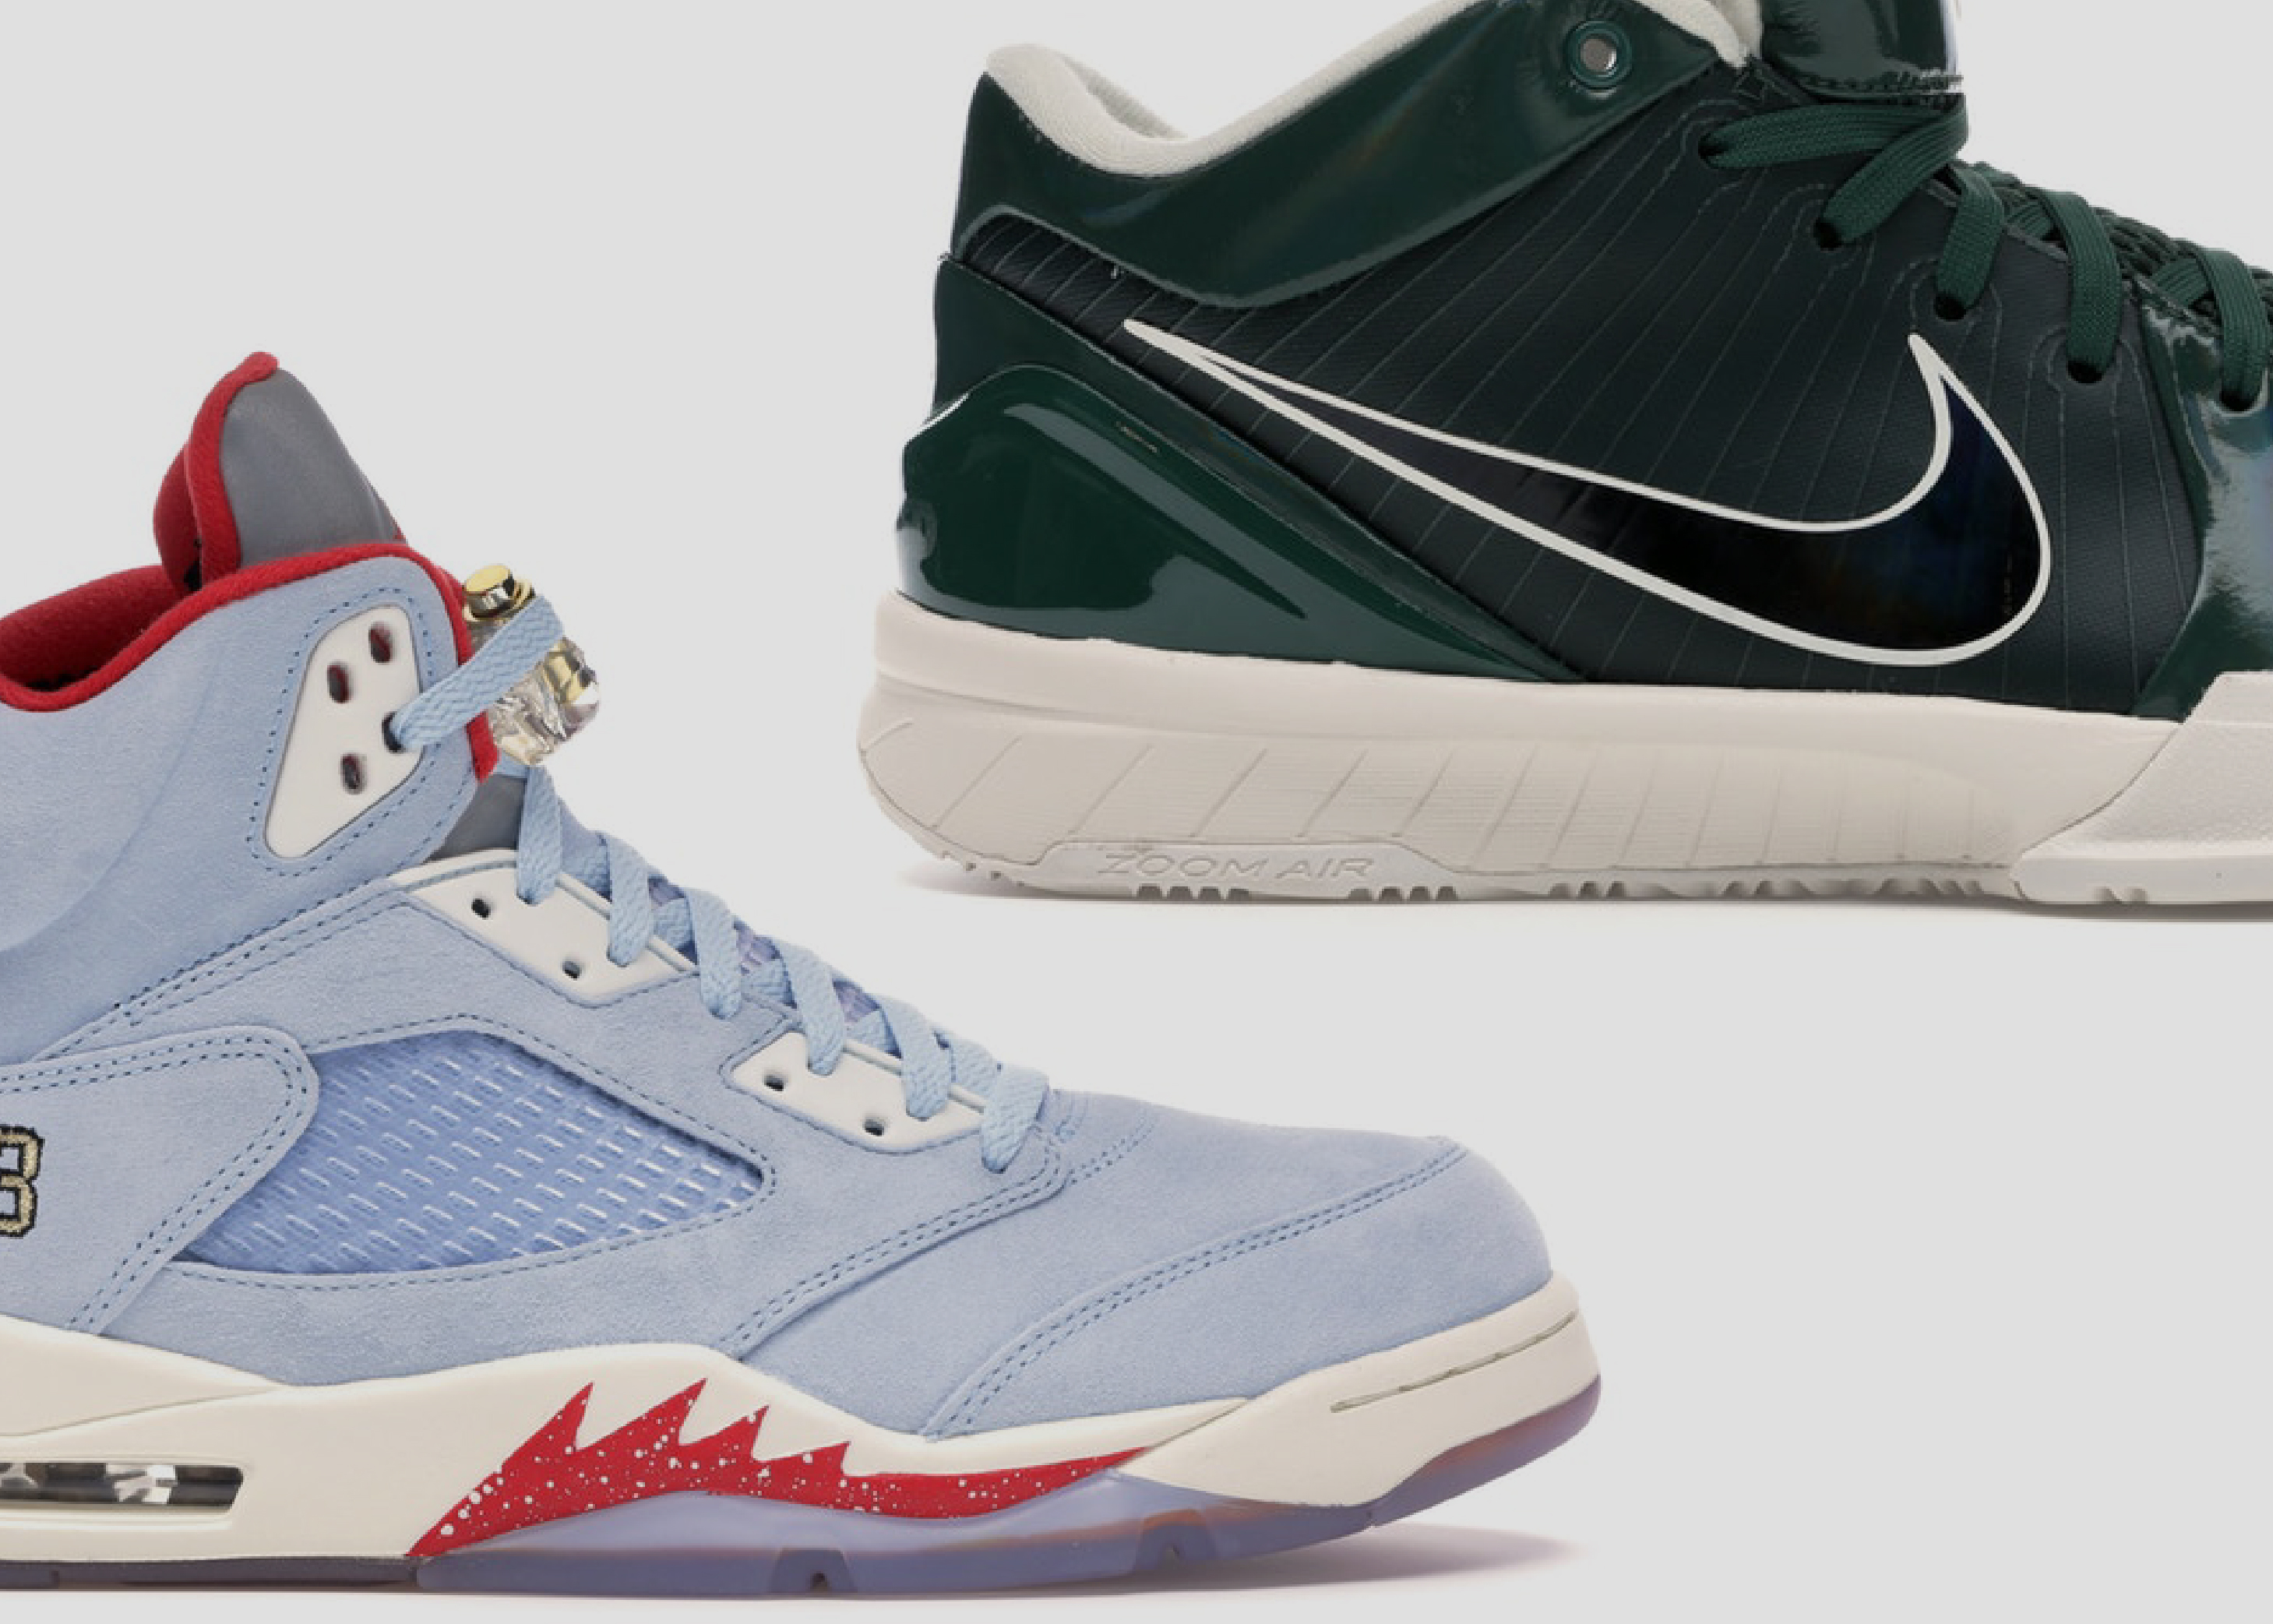 The Best Sneaker Collaborations of 2019